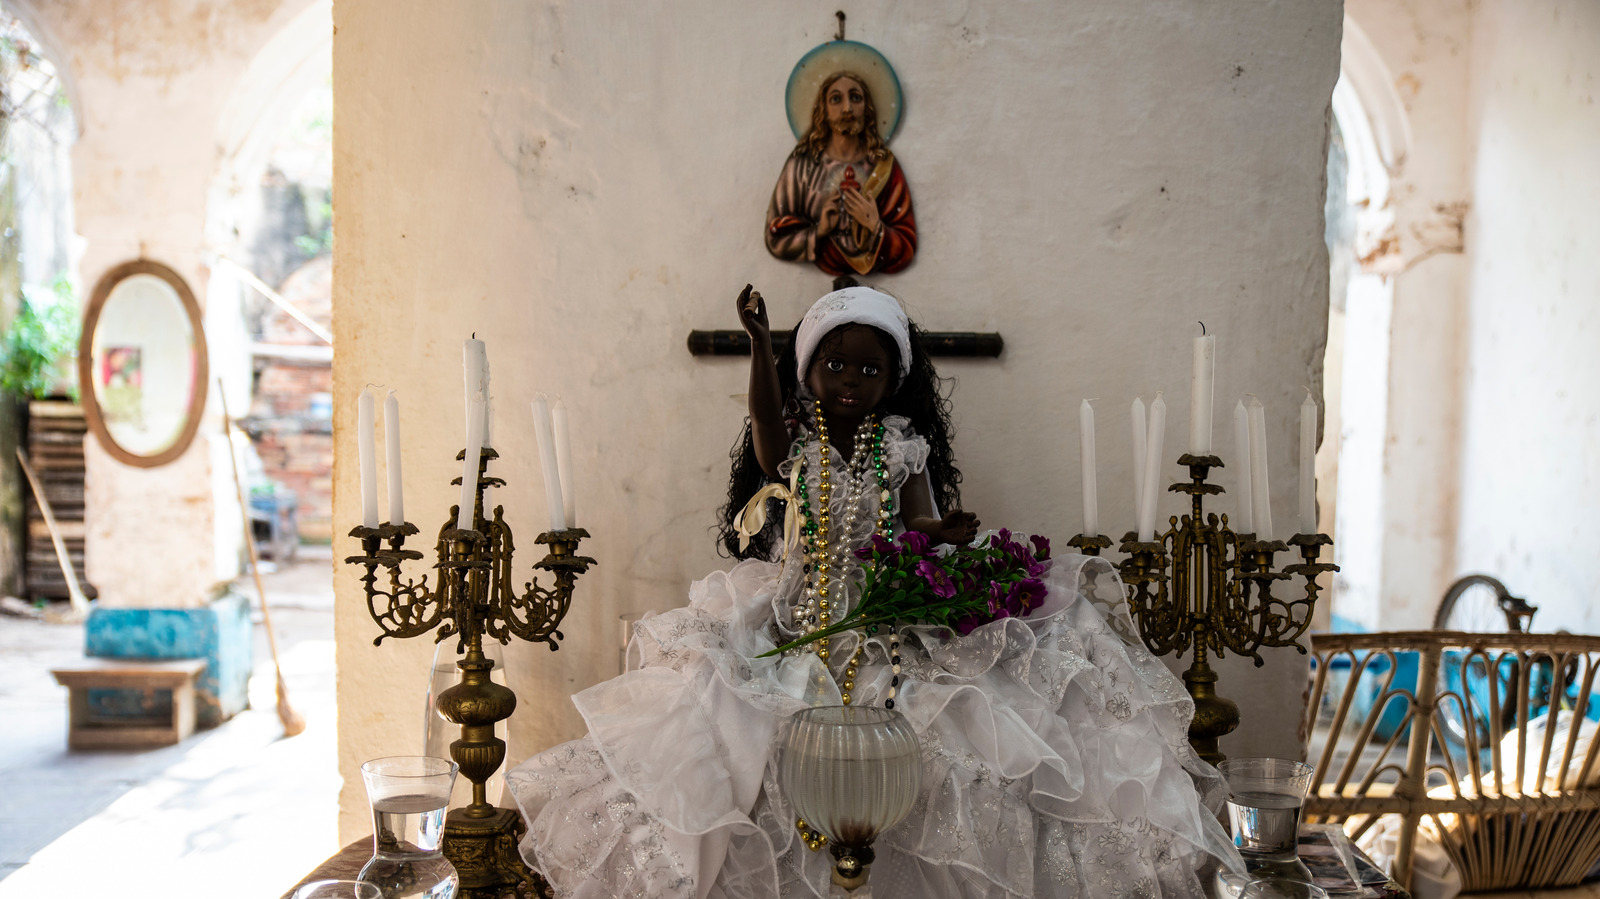 What Is Santeria And What Do Followers Believe?